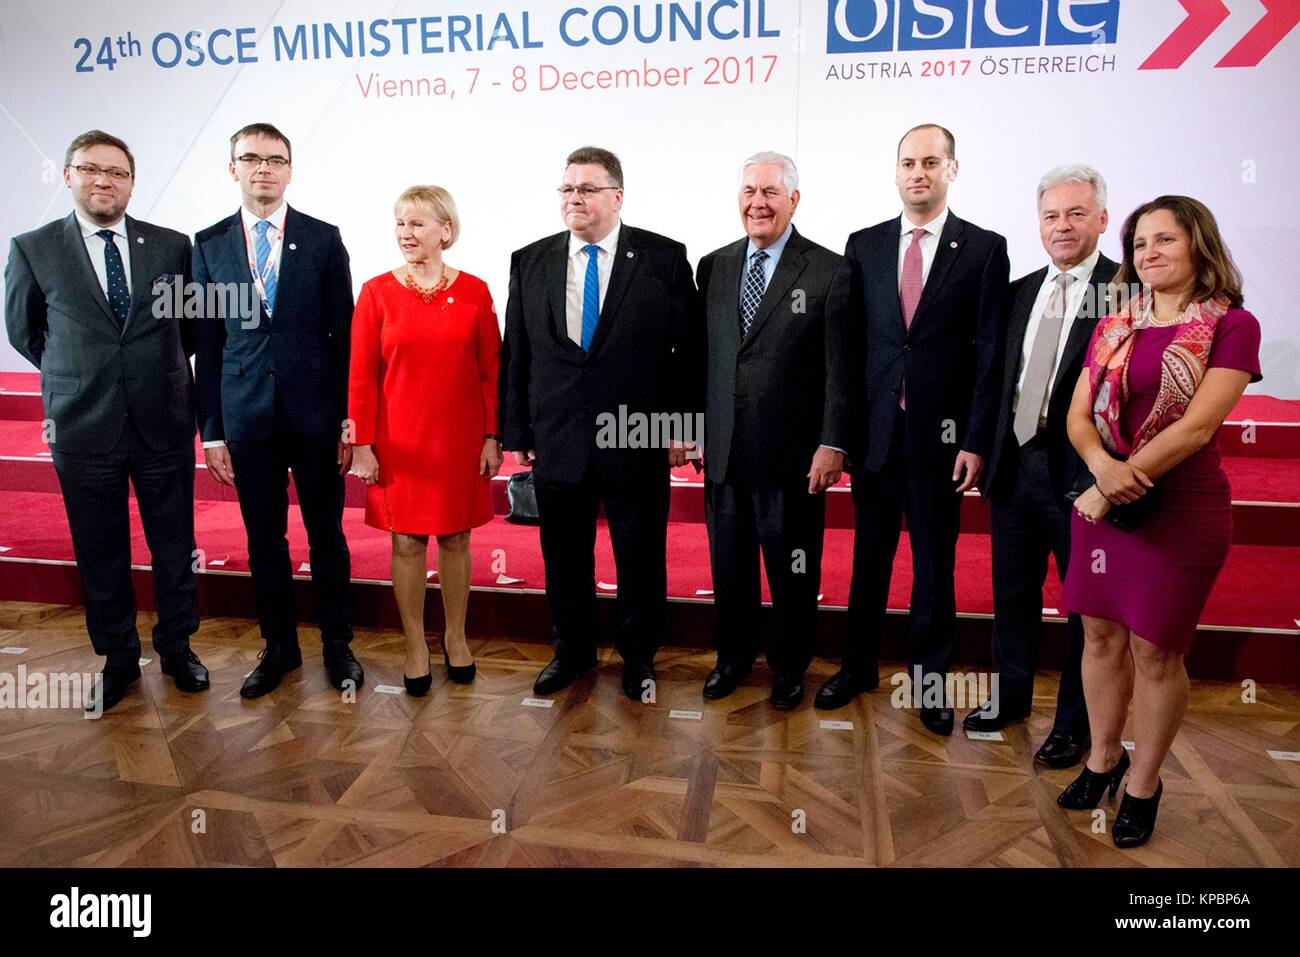 U.S. Secretary of State Rex Tillerson (center) poses with Friends of Georgia Group at the Organization for Security and Co-operation in Europe (OSCE) Ministerial Council December 7, 2017 in Vienna, Austria. Stock Photo